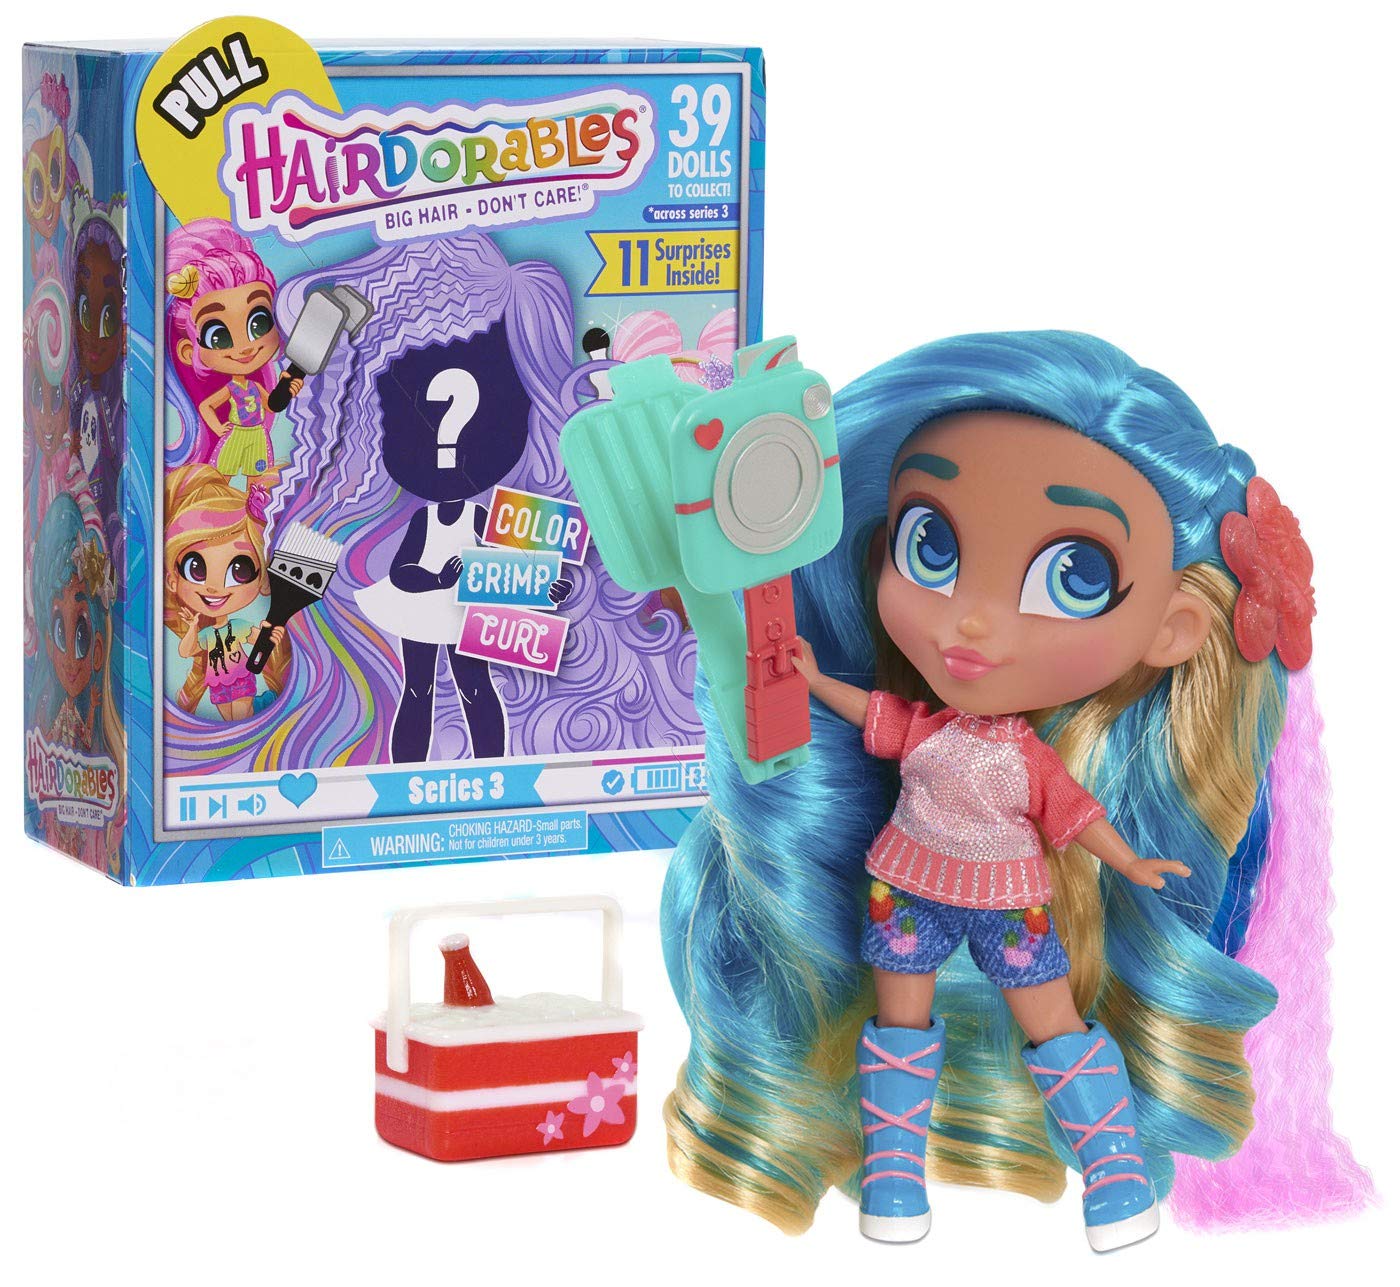 New Toys For Girls 2022: Hairdorables Series 3